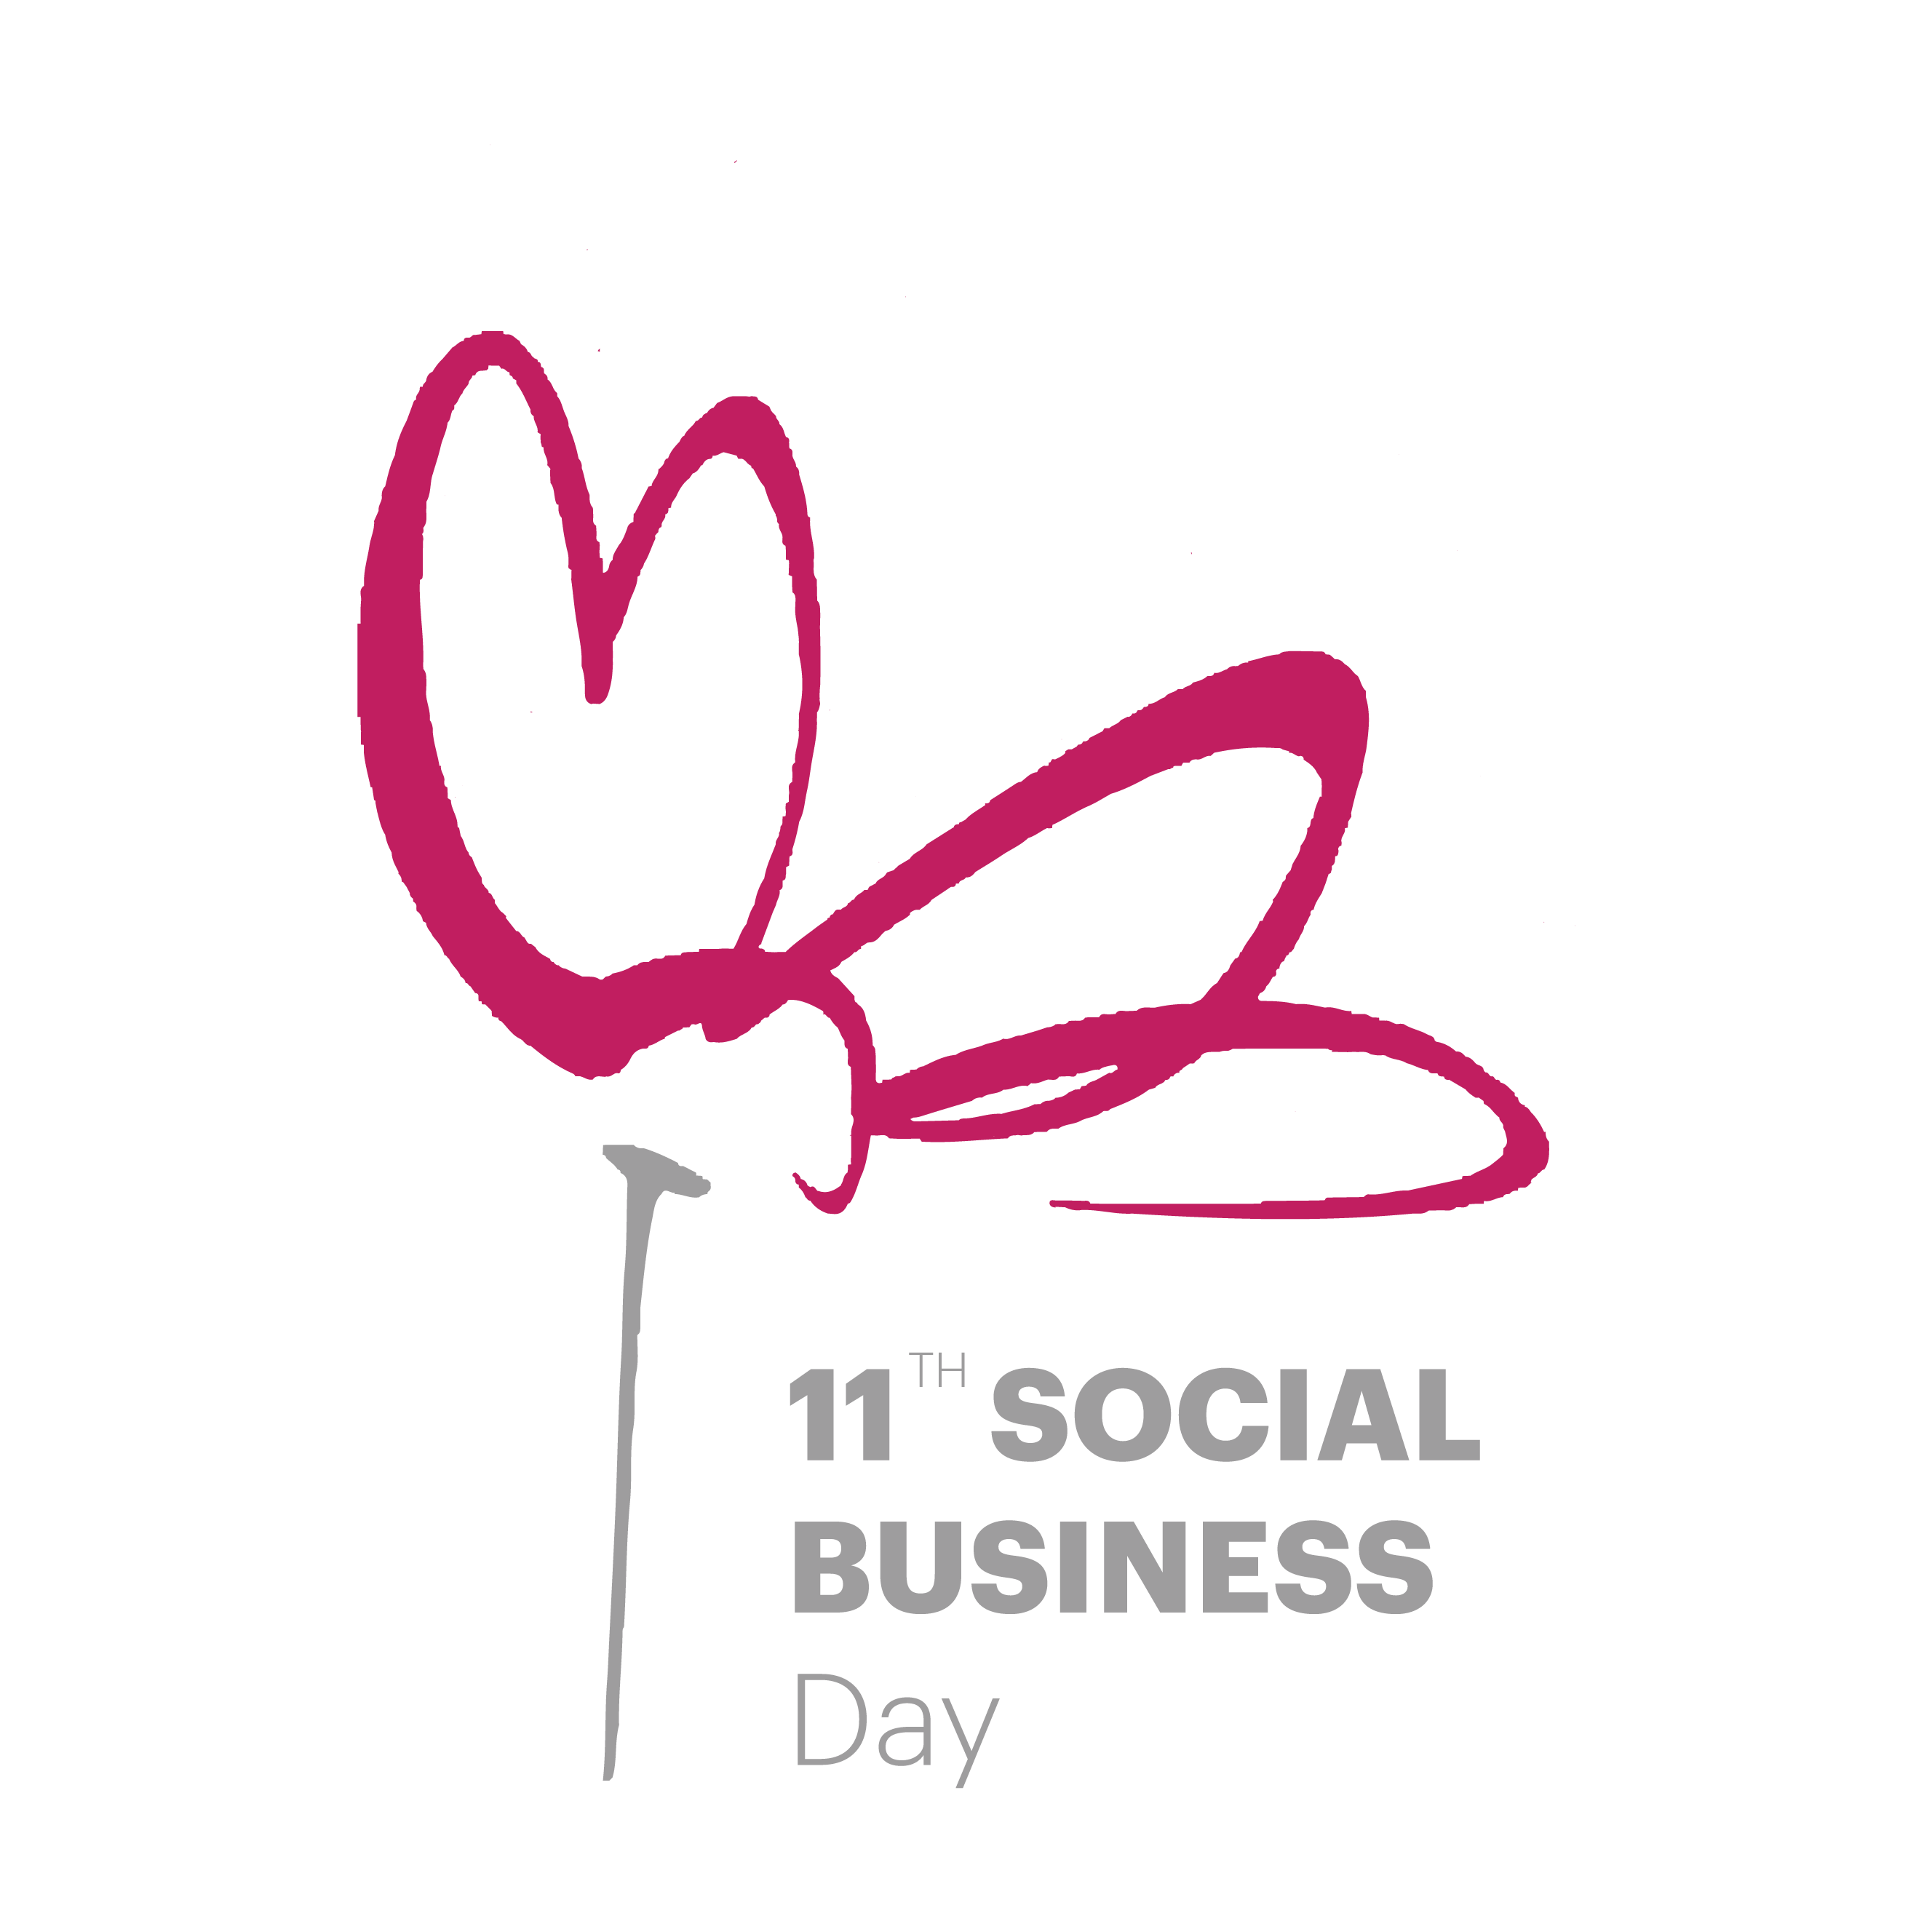 11th Social Business Day 2021